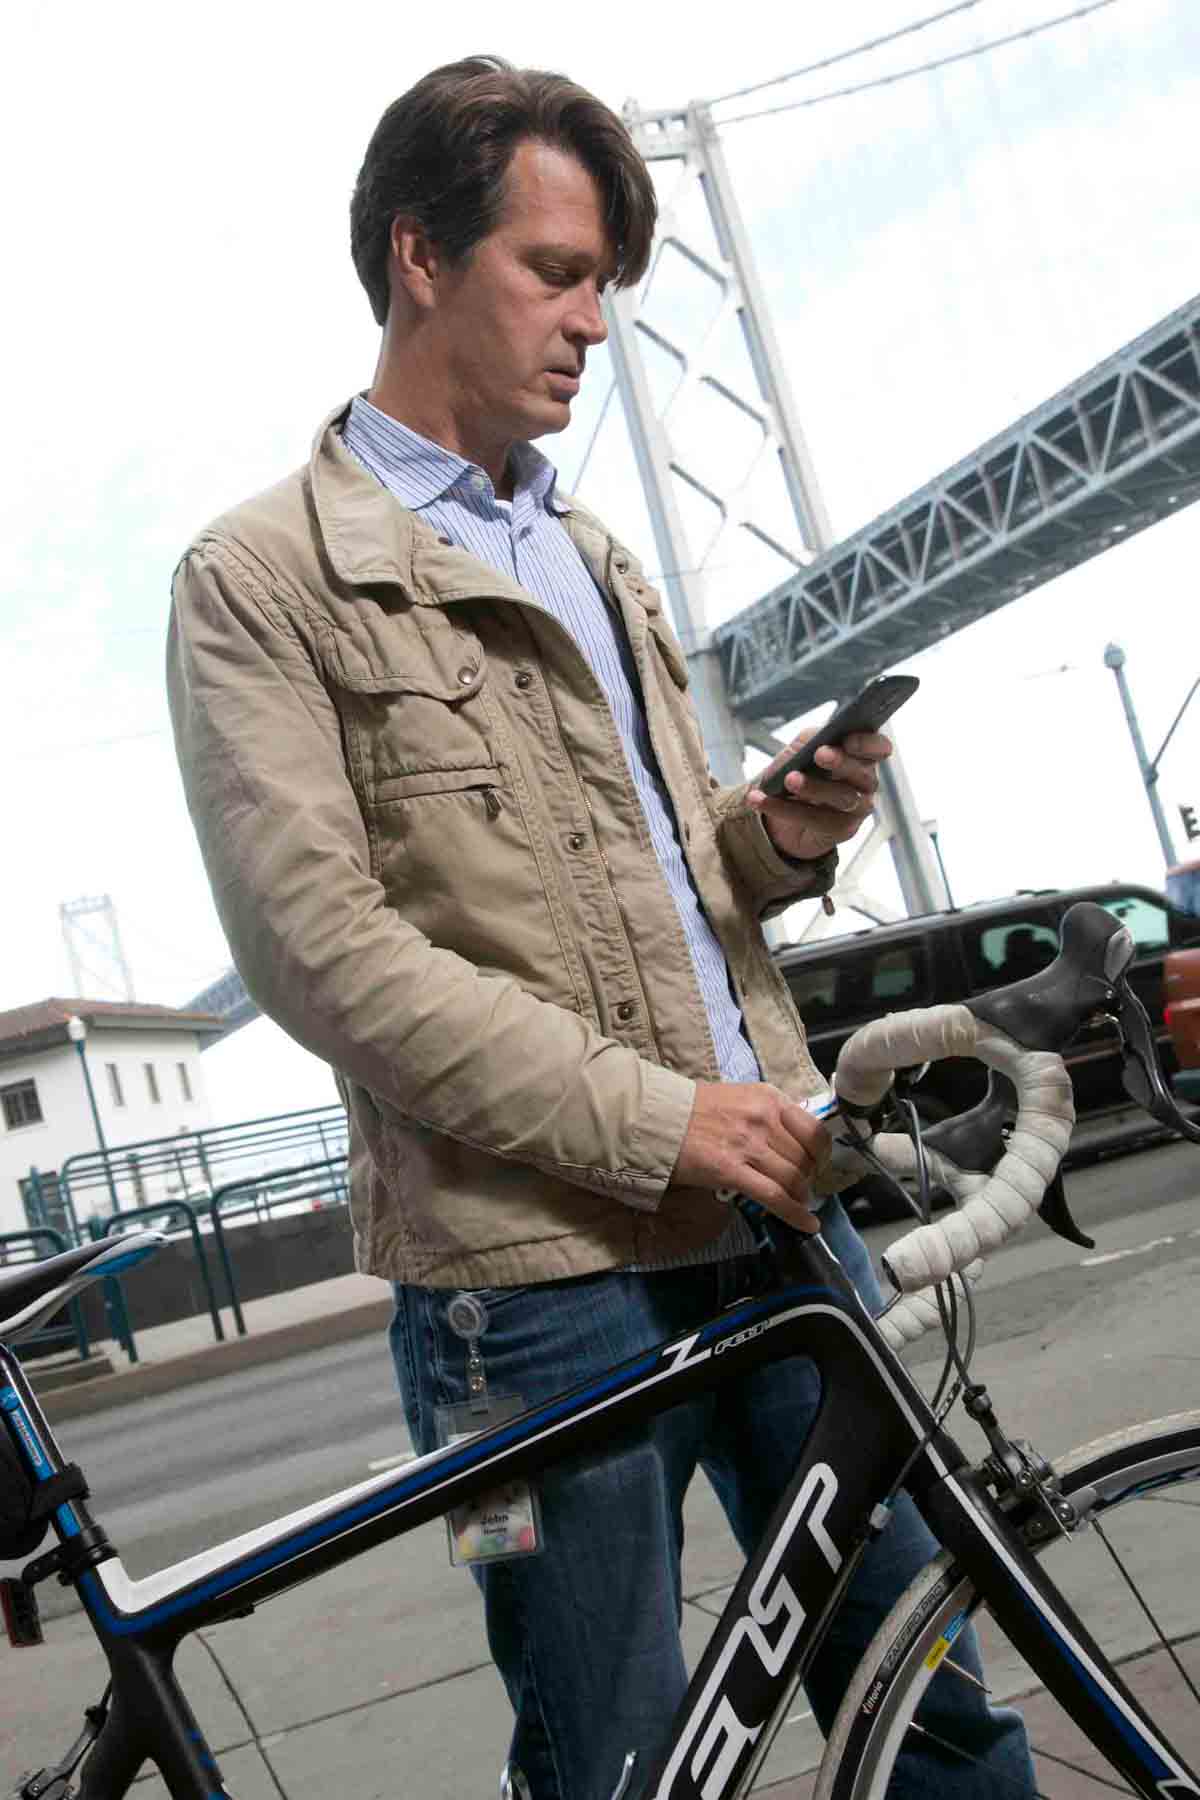 A brown-haired man looks at his phone while holding a road bike with the Bay Bridge in the background